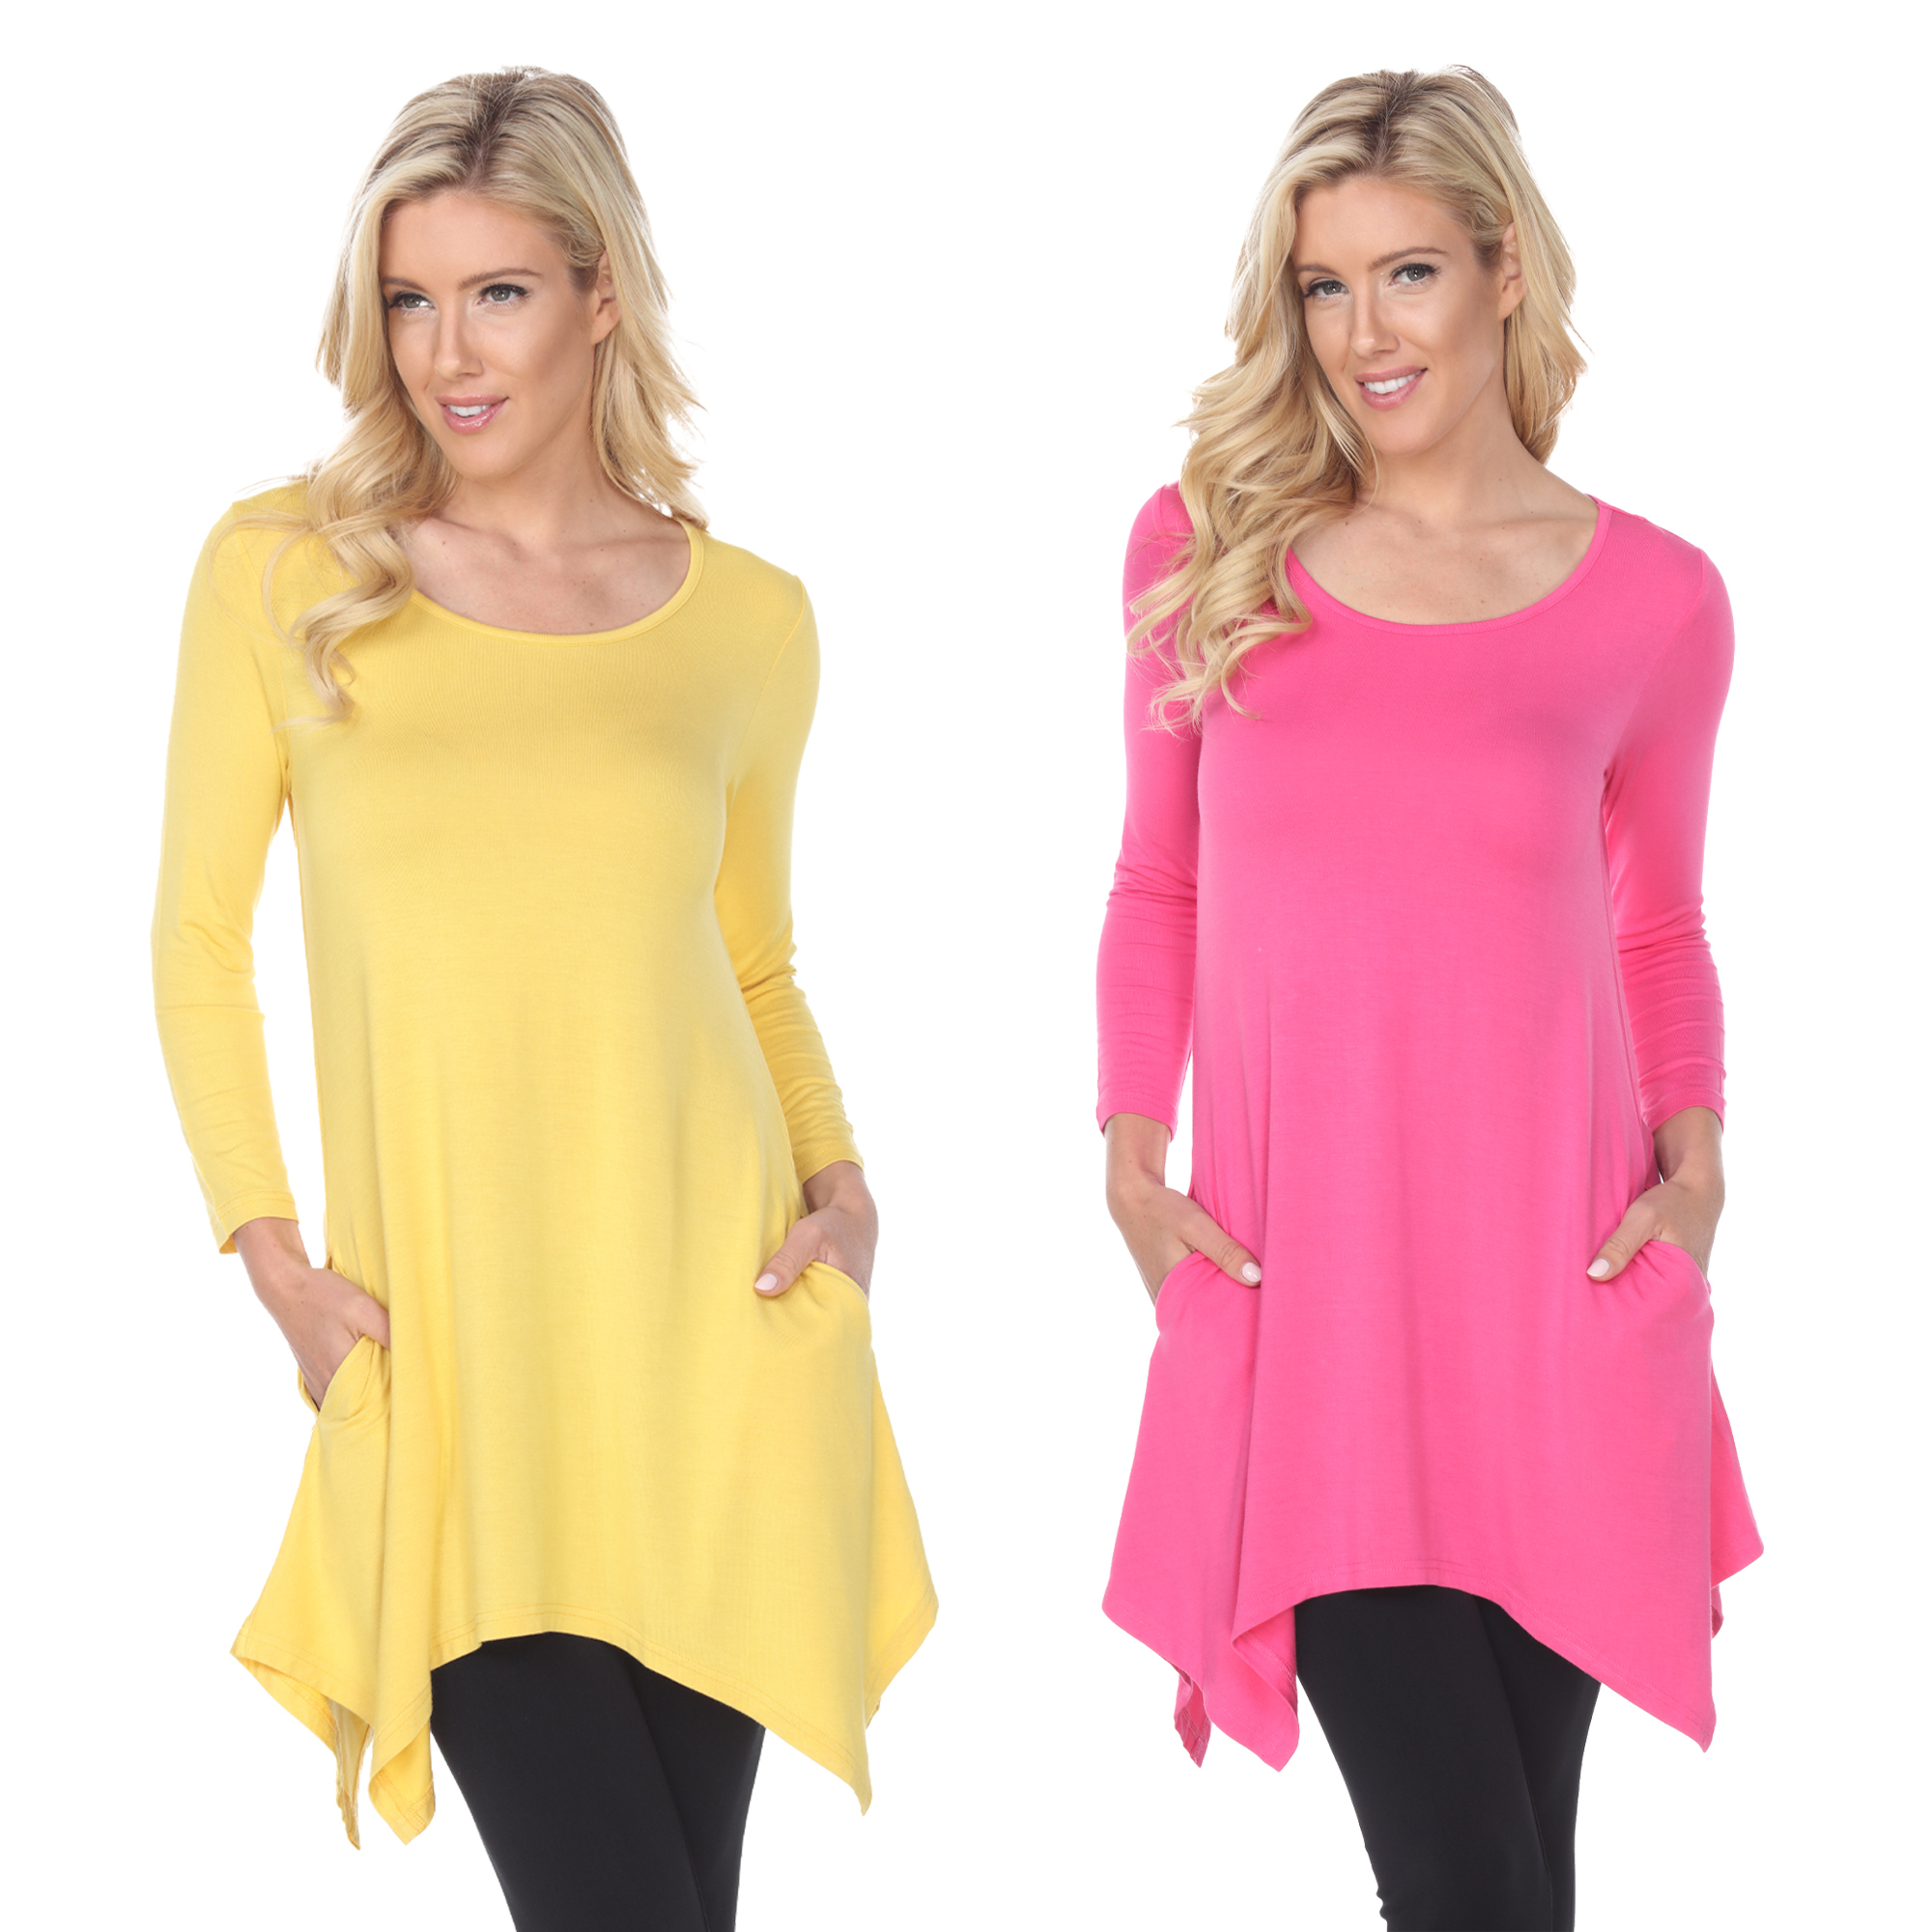 White Mark Women's Pack Of 2 Yellow Tunic Top - Yellow, Coral, Large